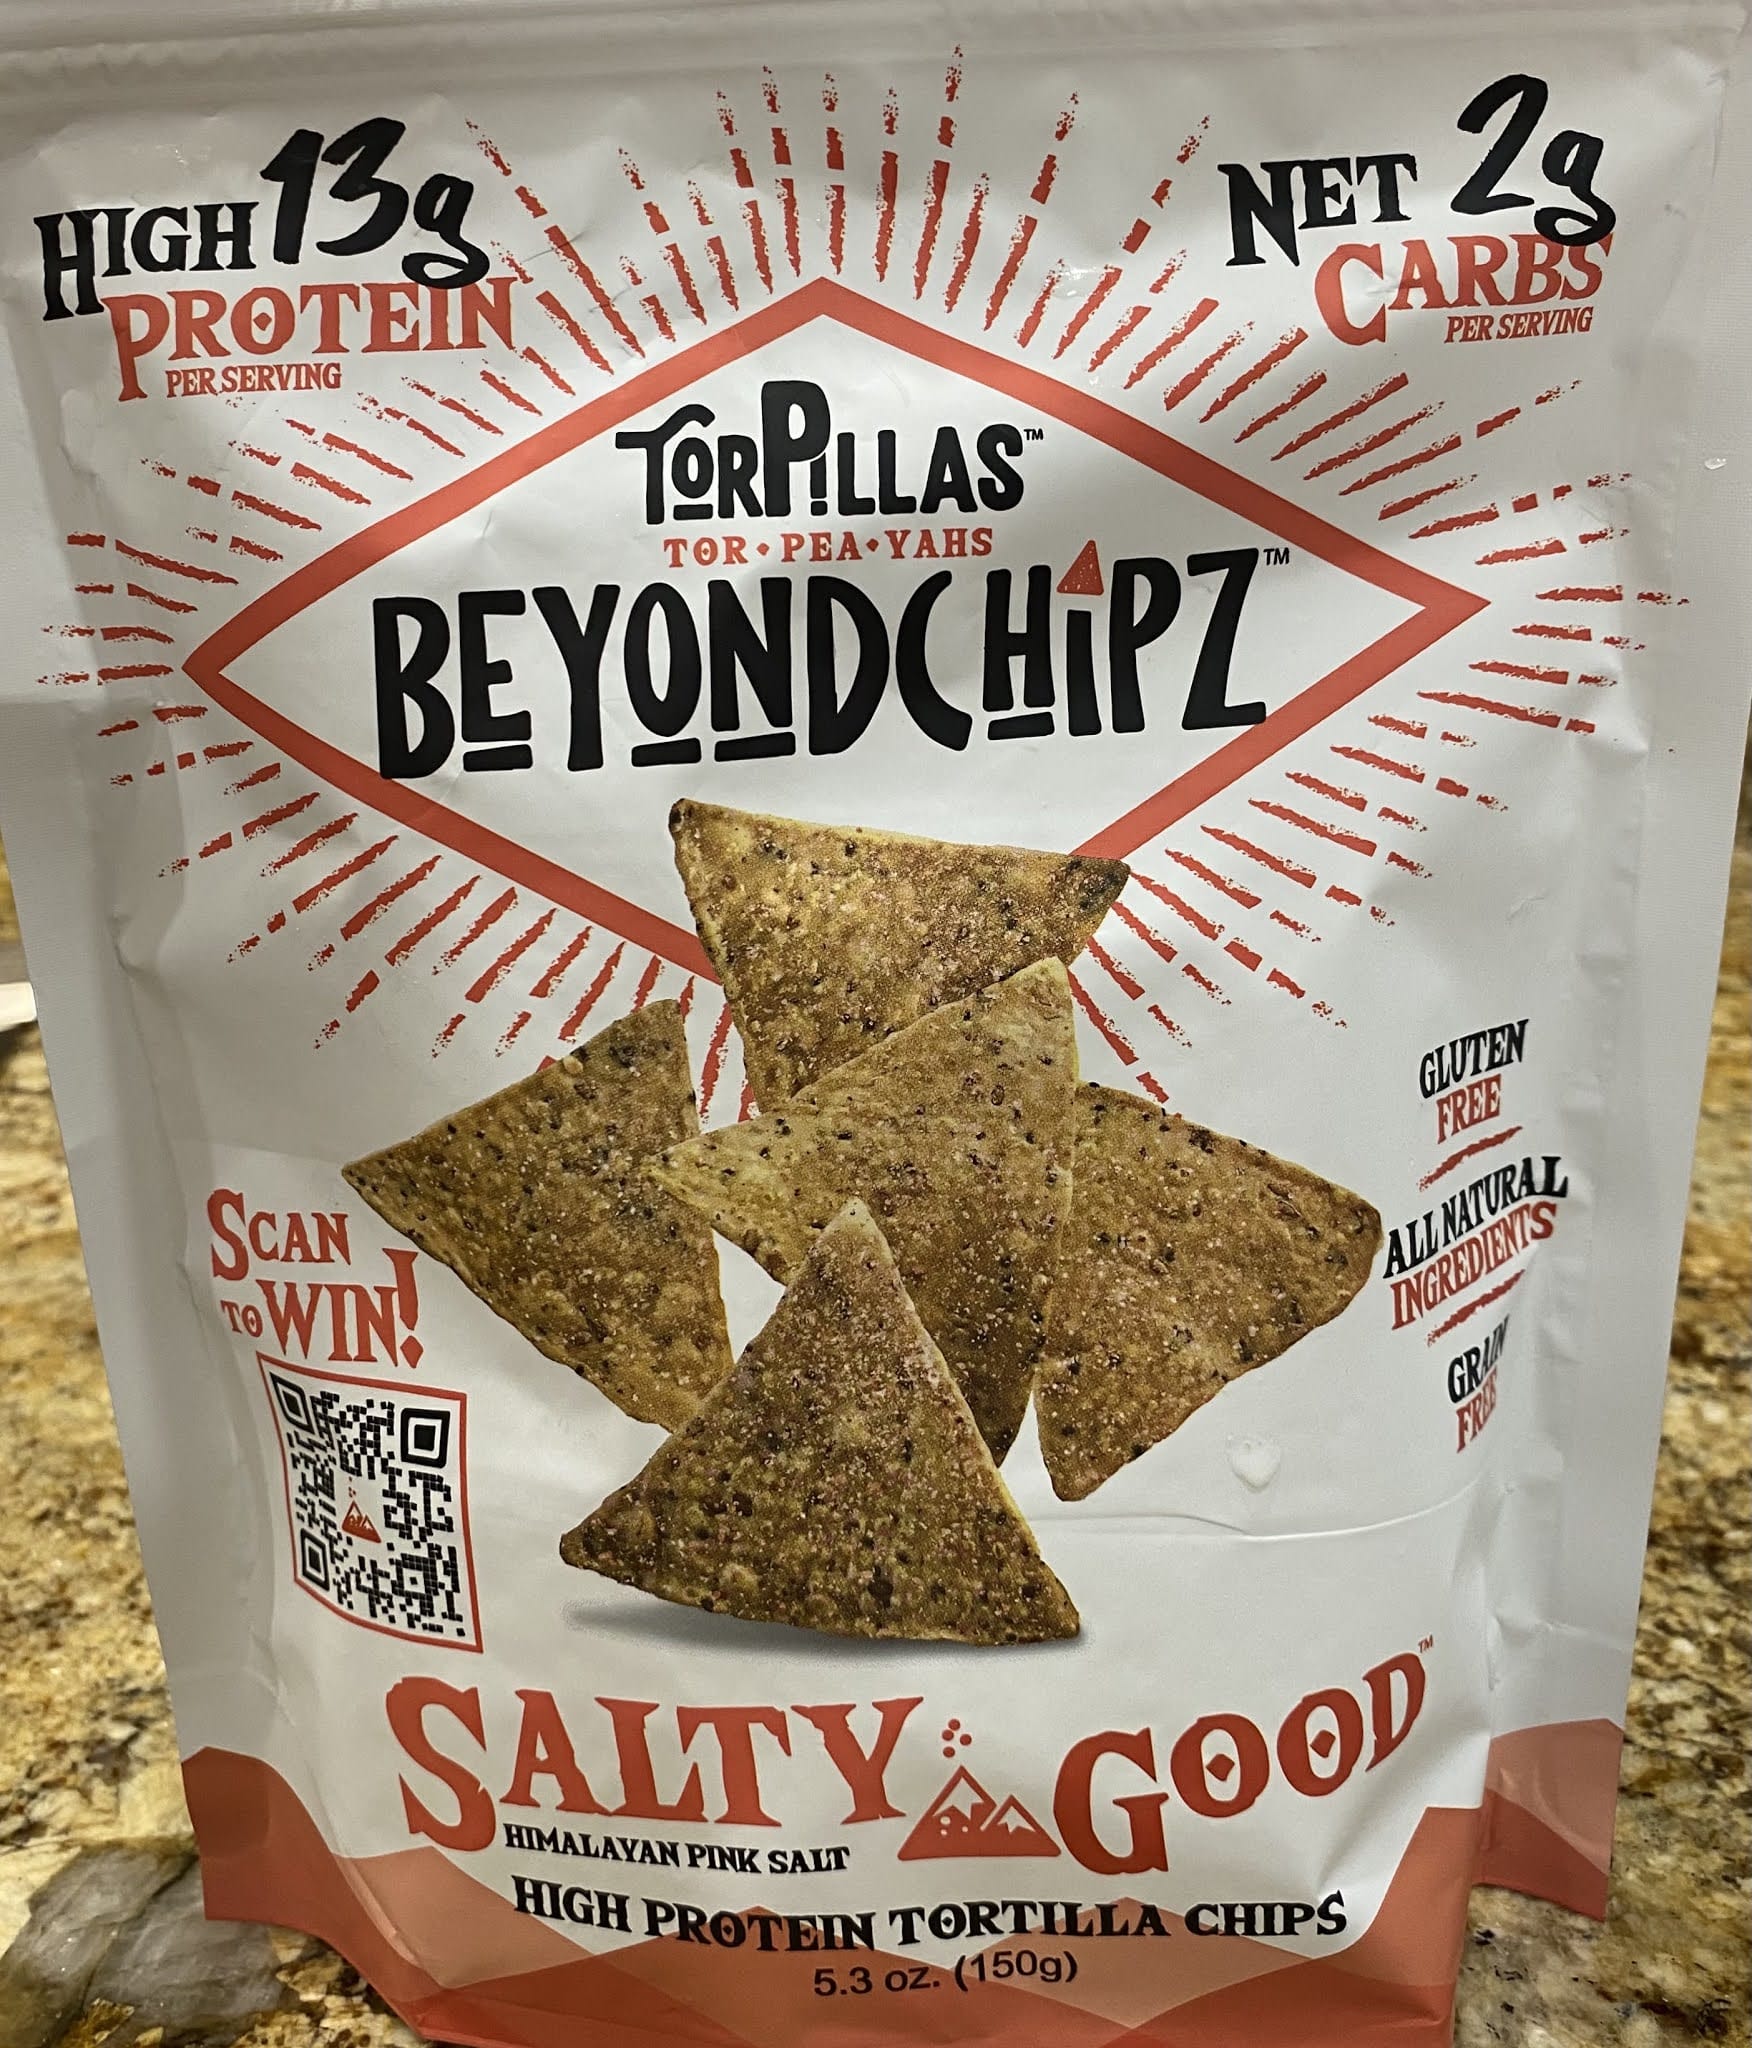 GREAT EATS HAWAII: LOW CARB TORTILLA CHIPS WITH GUACAMOLE